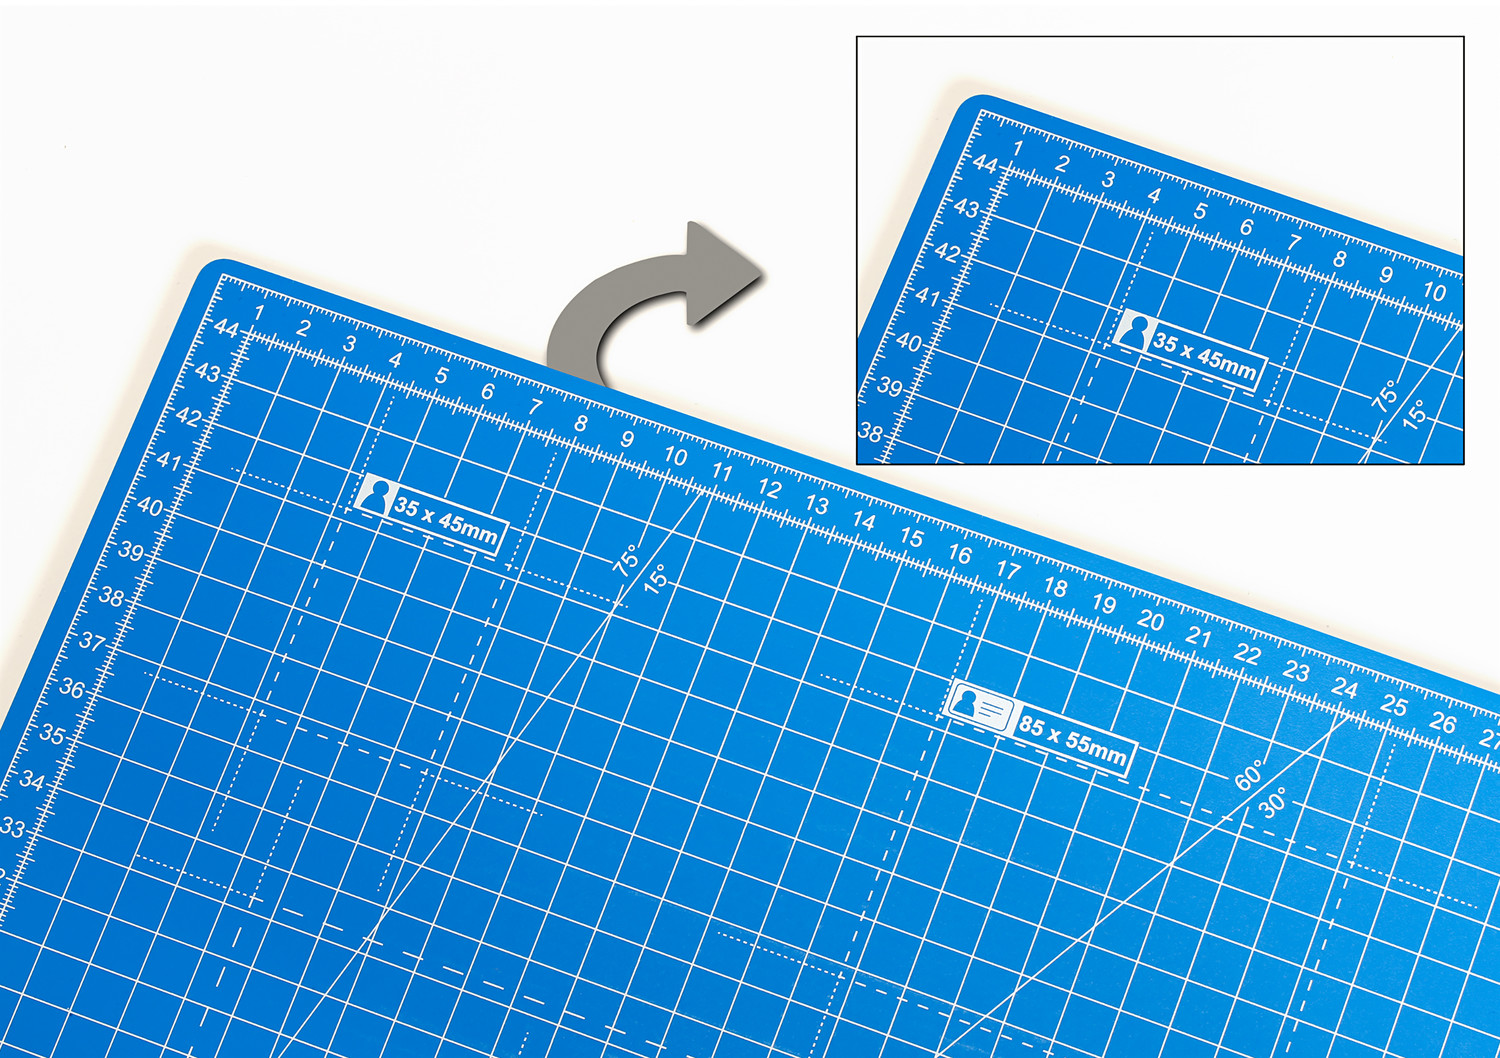 The cutting mat is printed on both front and reverse so you can use either side, extending its service life.